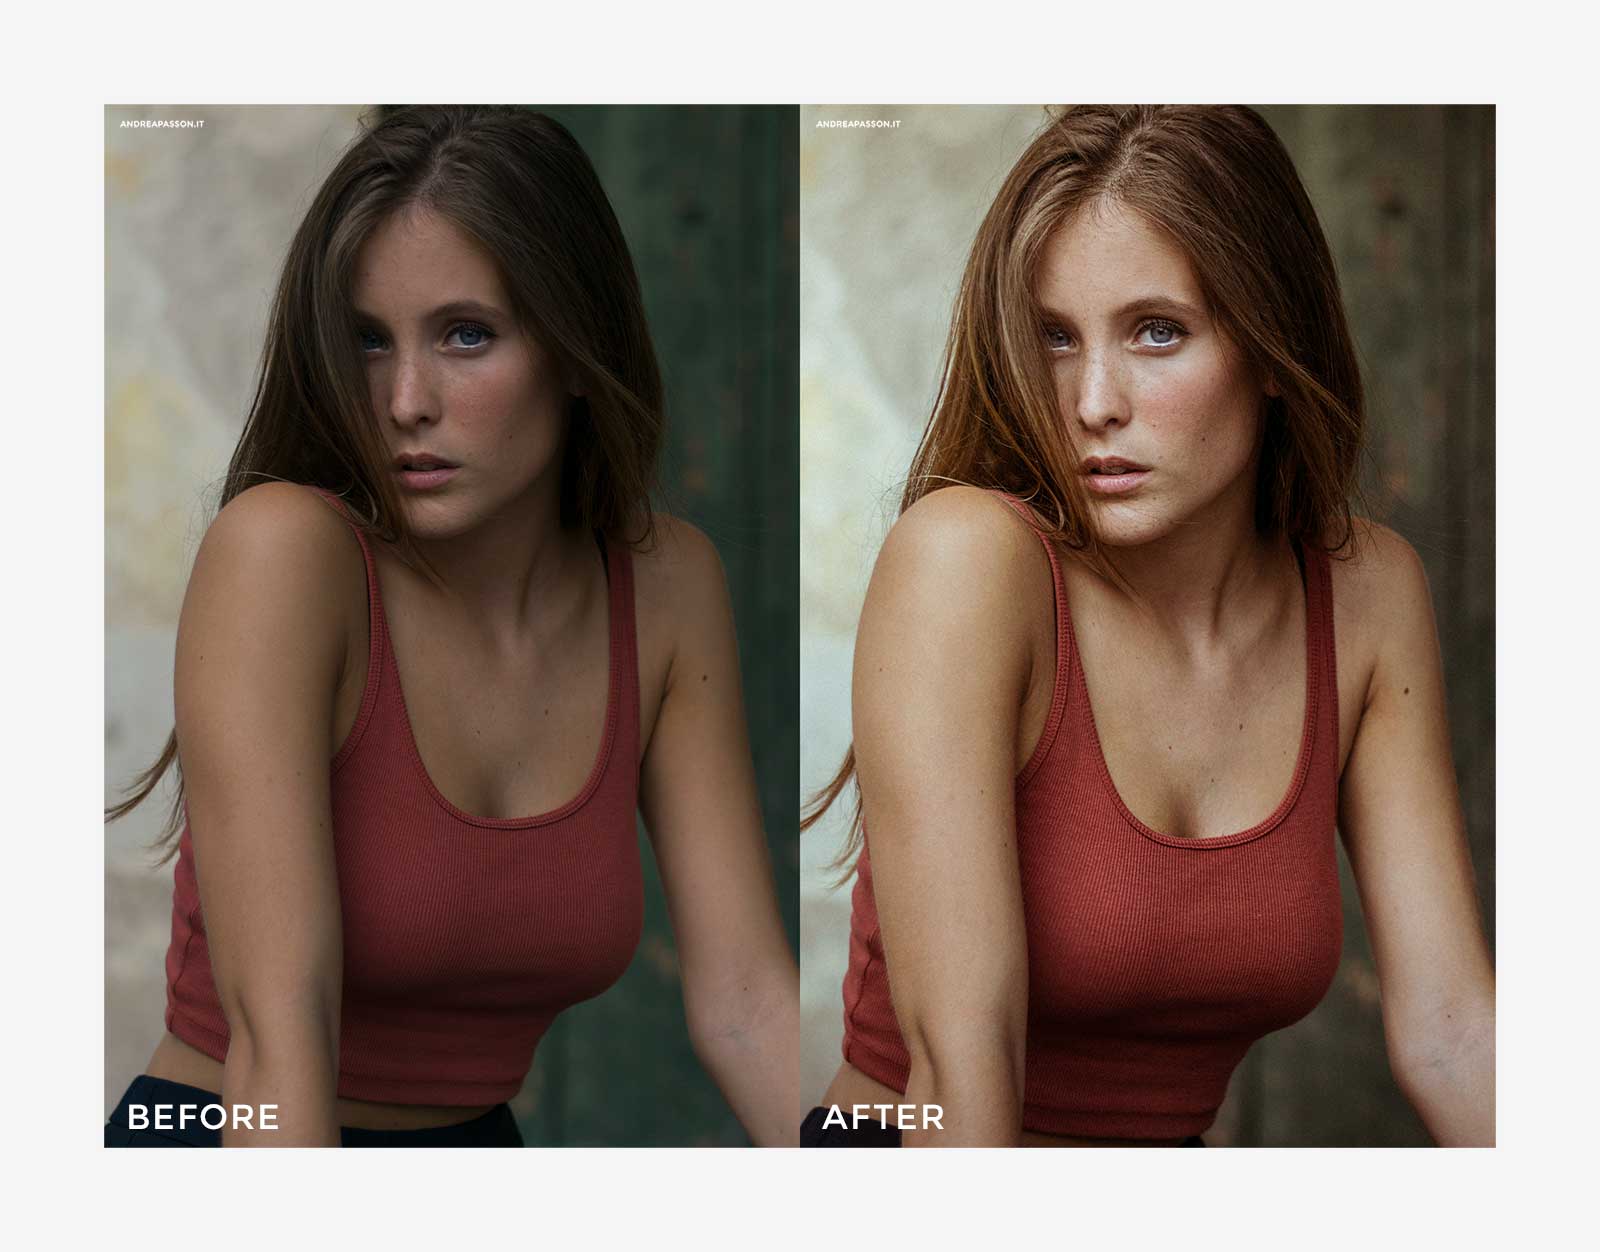 Before & After - Post Produzione Fotografica Professionale a Treviso - Glamour Photography